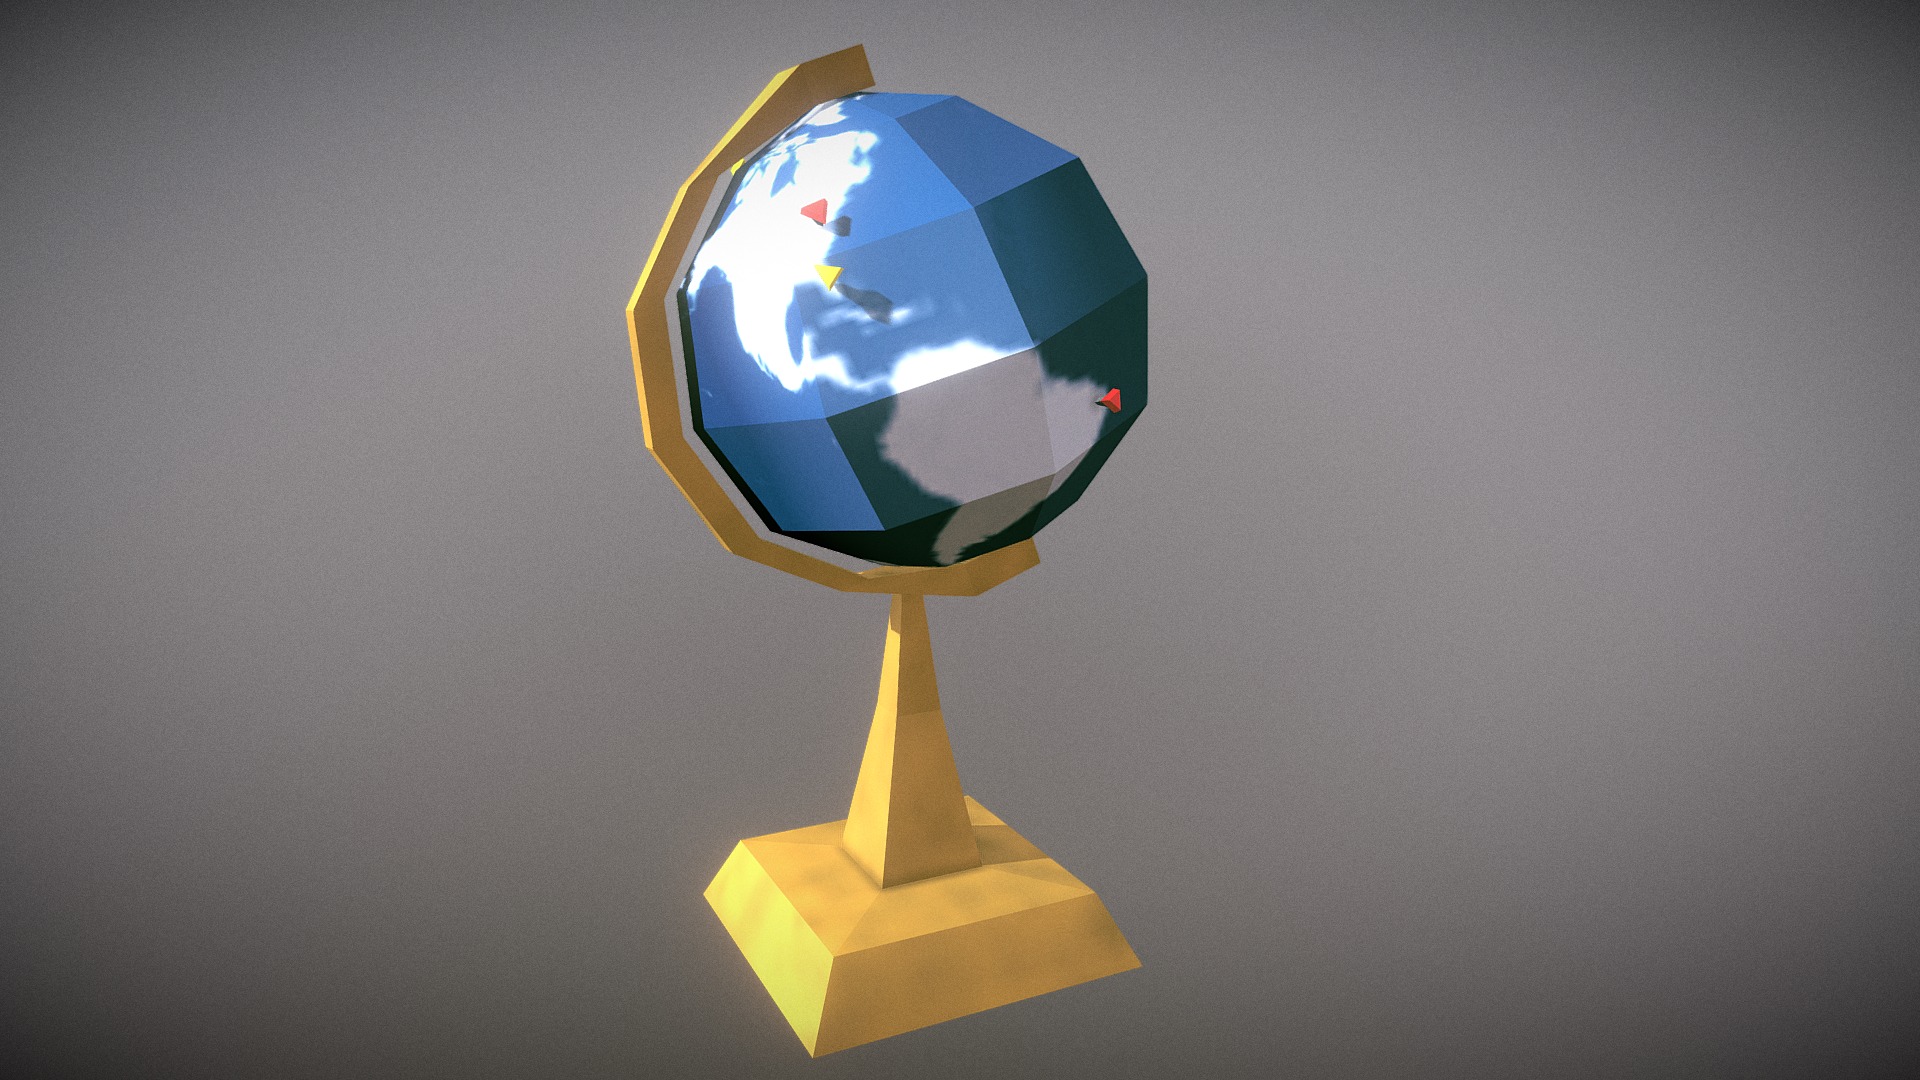 3D model Tacked Globe: Household Props Challenge Day 17 - This is a 3D model of the Tacked Globe: Household Props Challenge Day 17. The 3D model is about a yellow and blue logo.